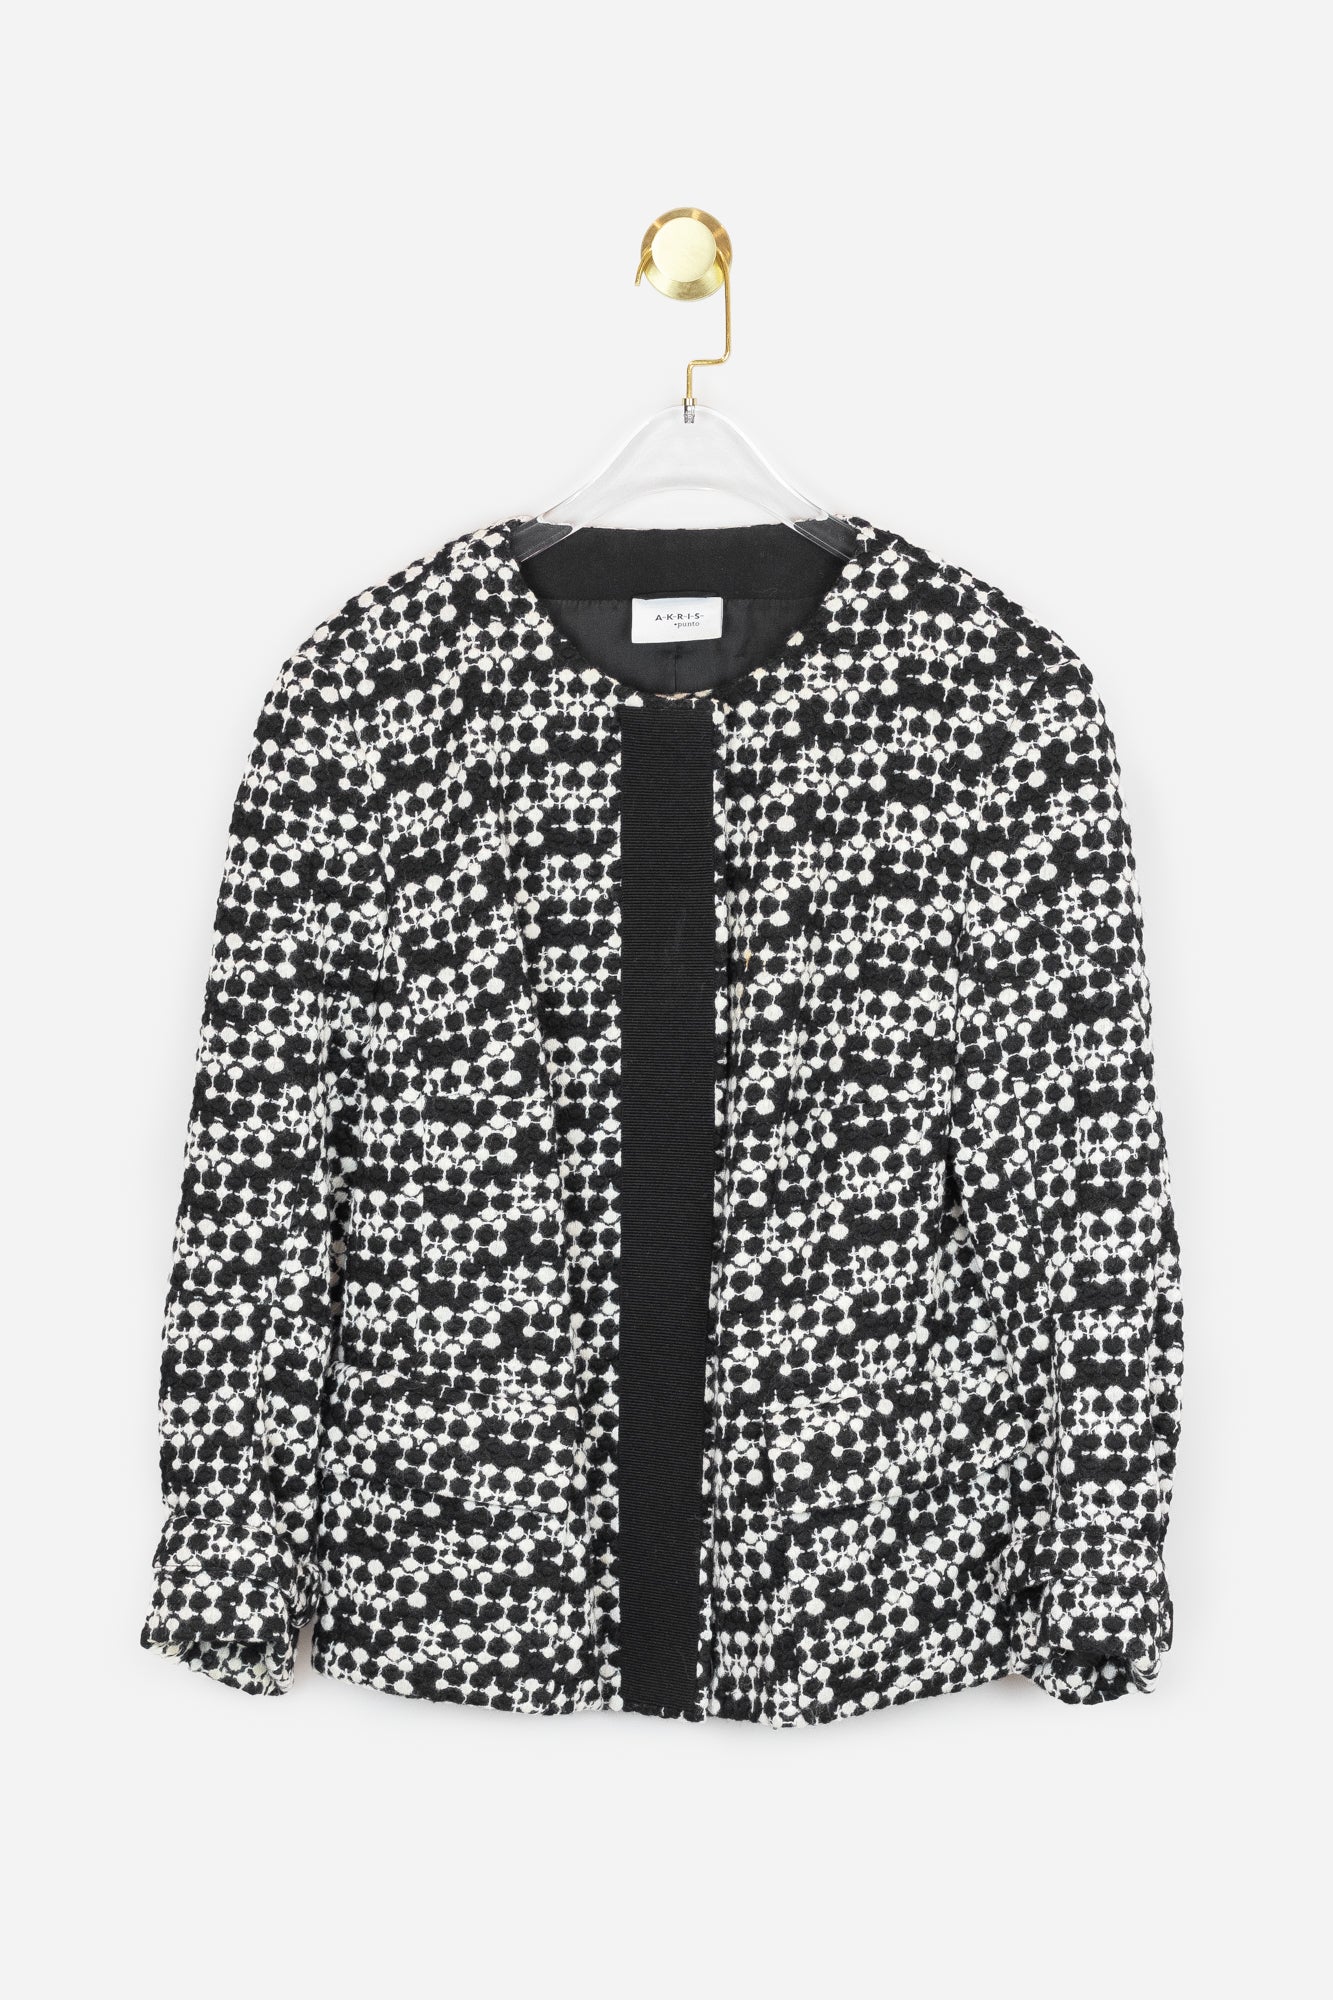 Black and White Tweed Jacket - So Over It Luxury Consignment